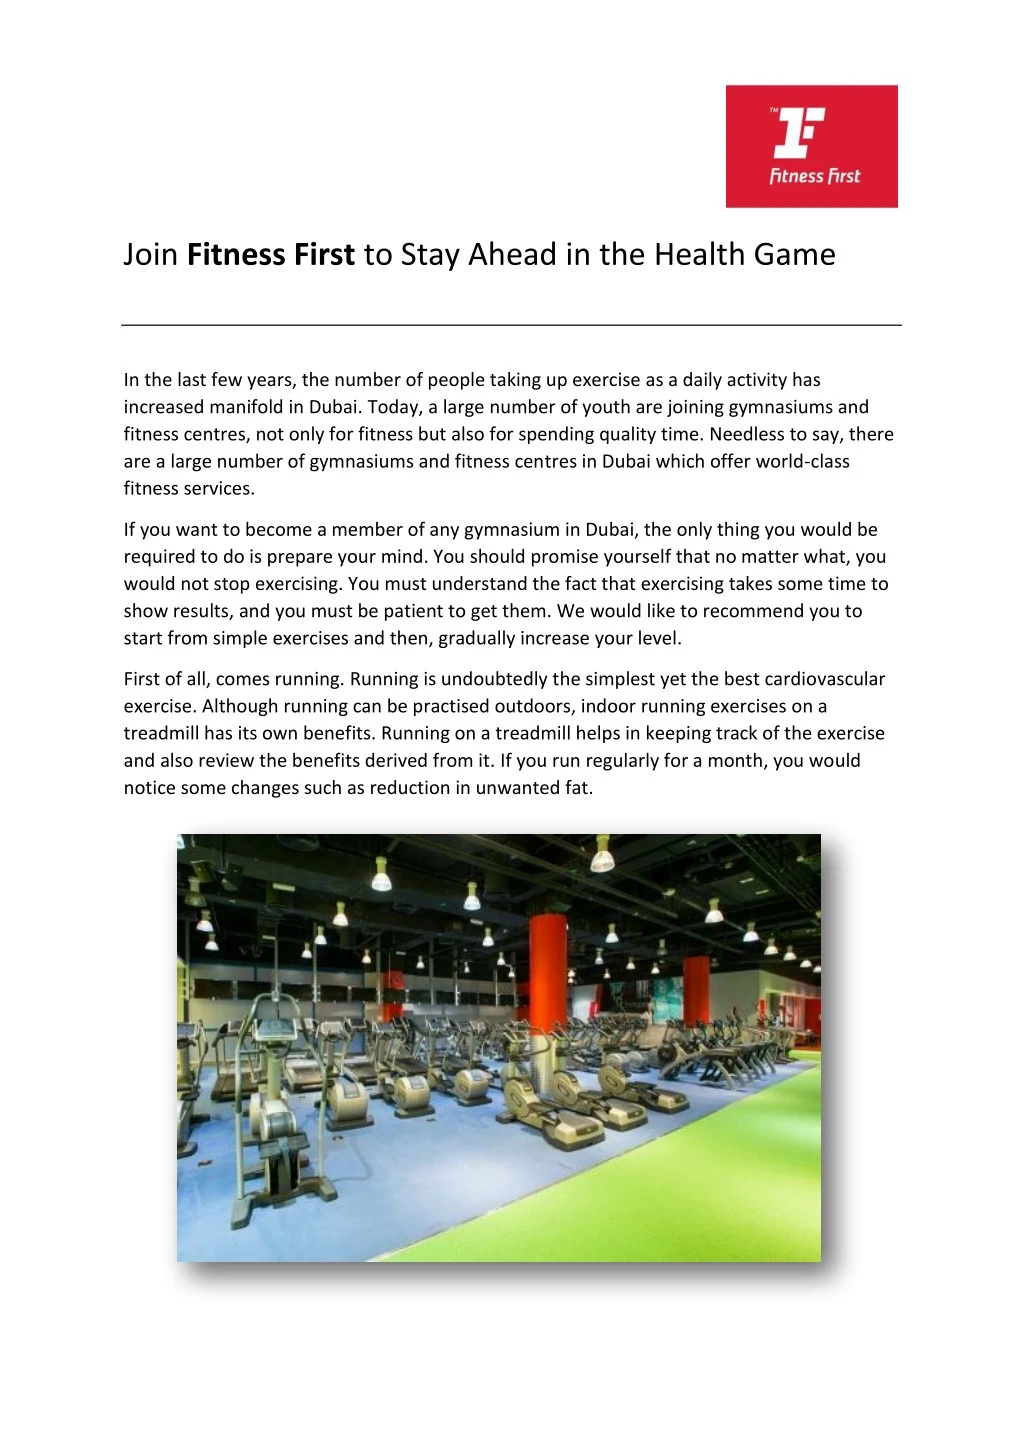 join fitness first to stay ahead in the health